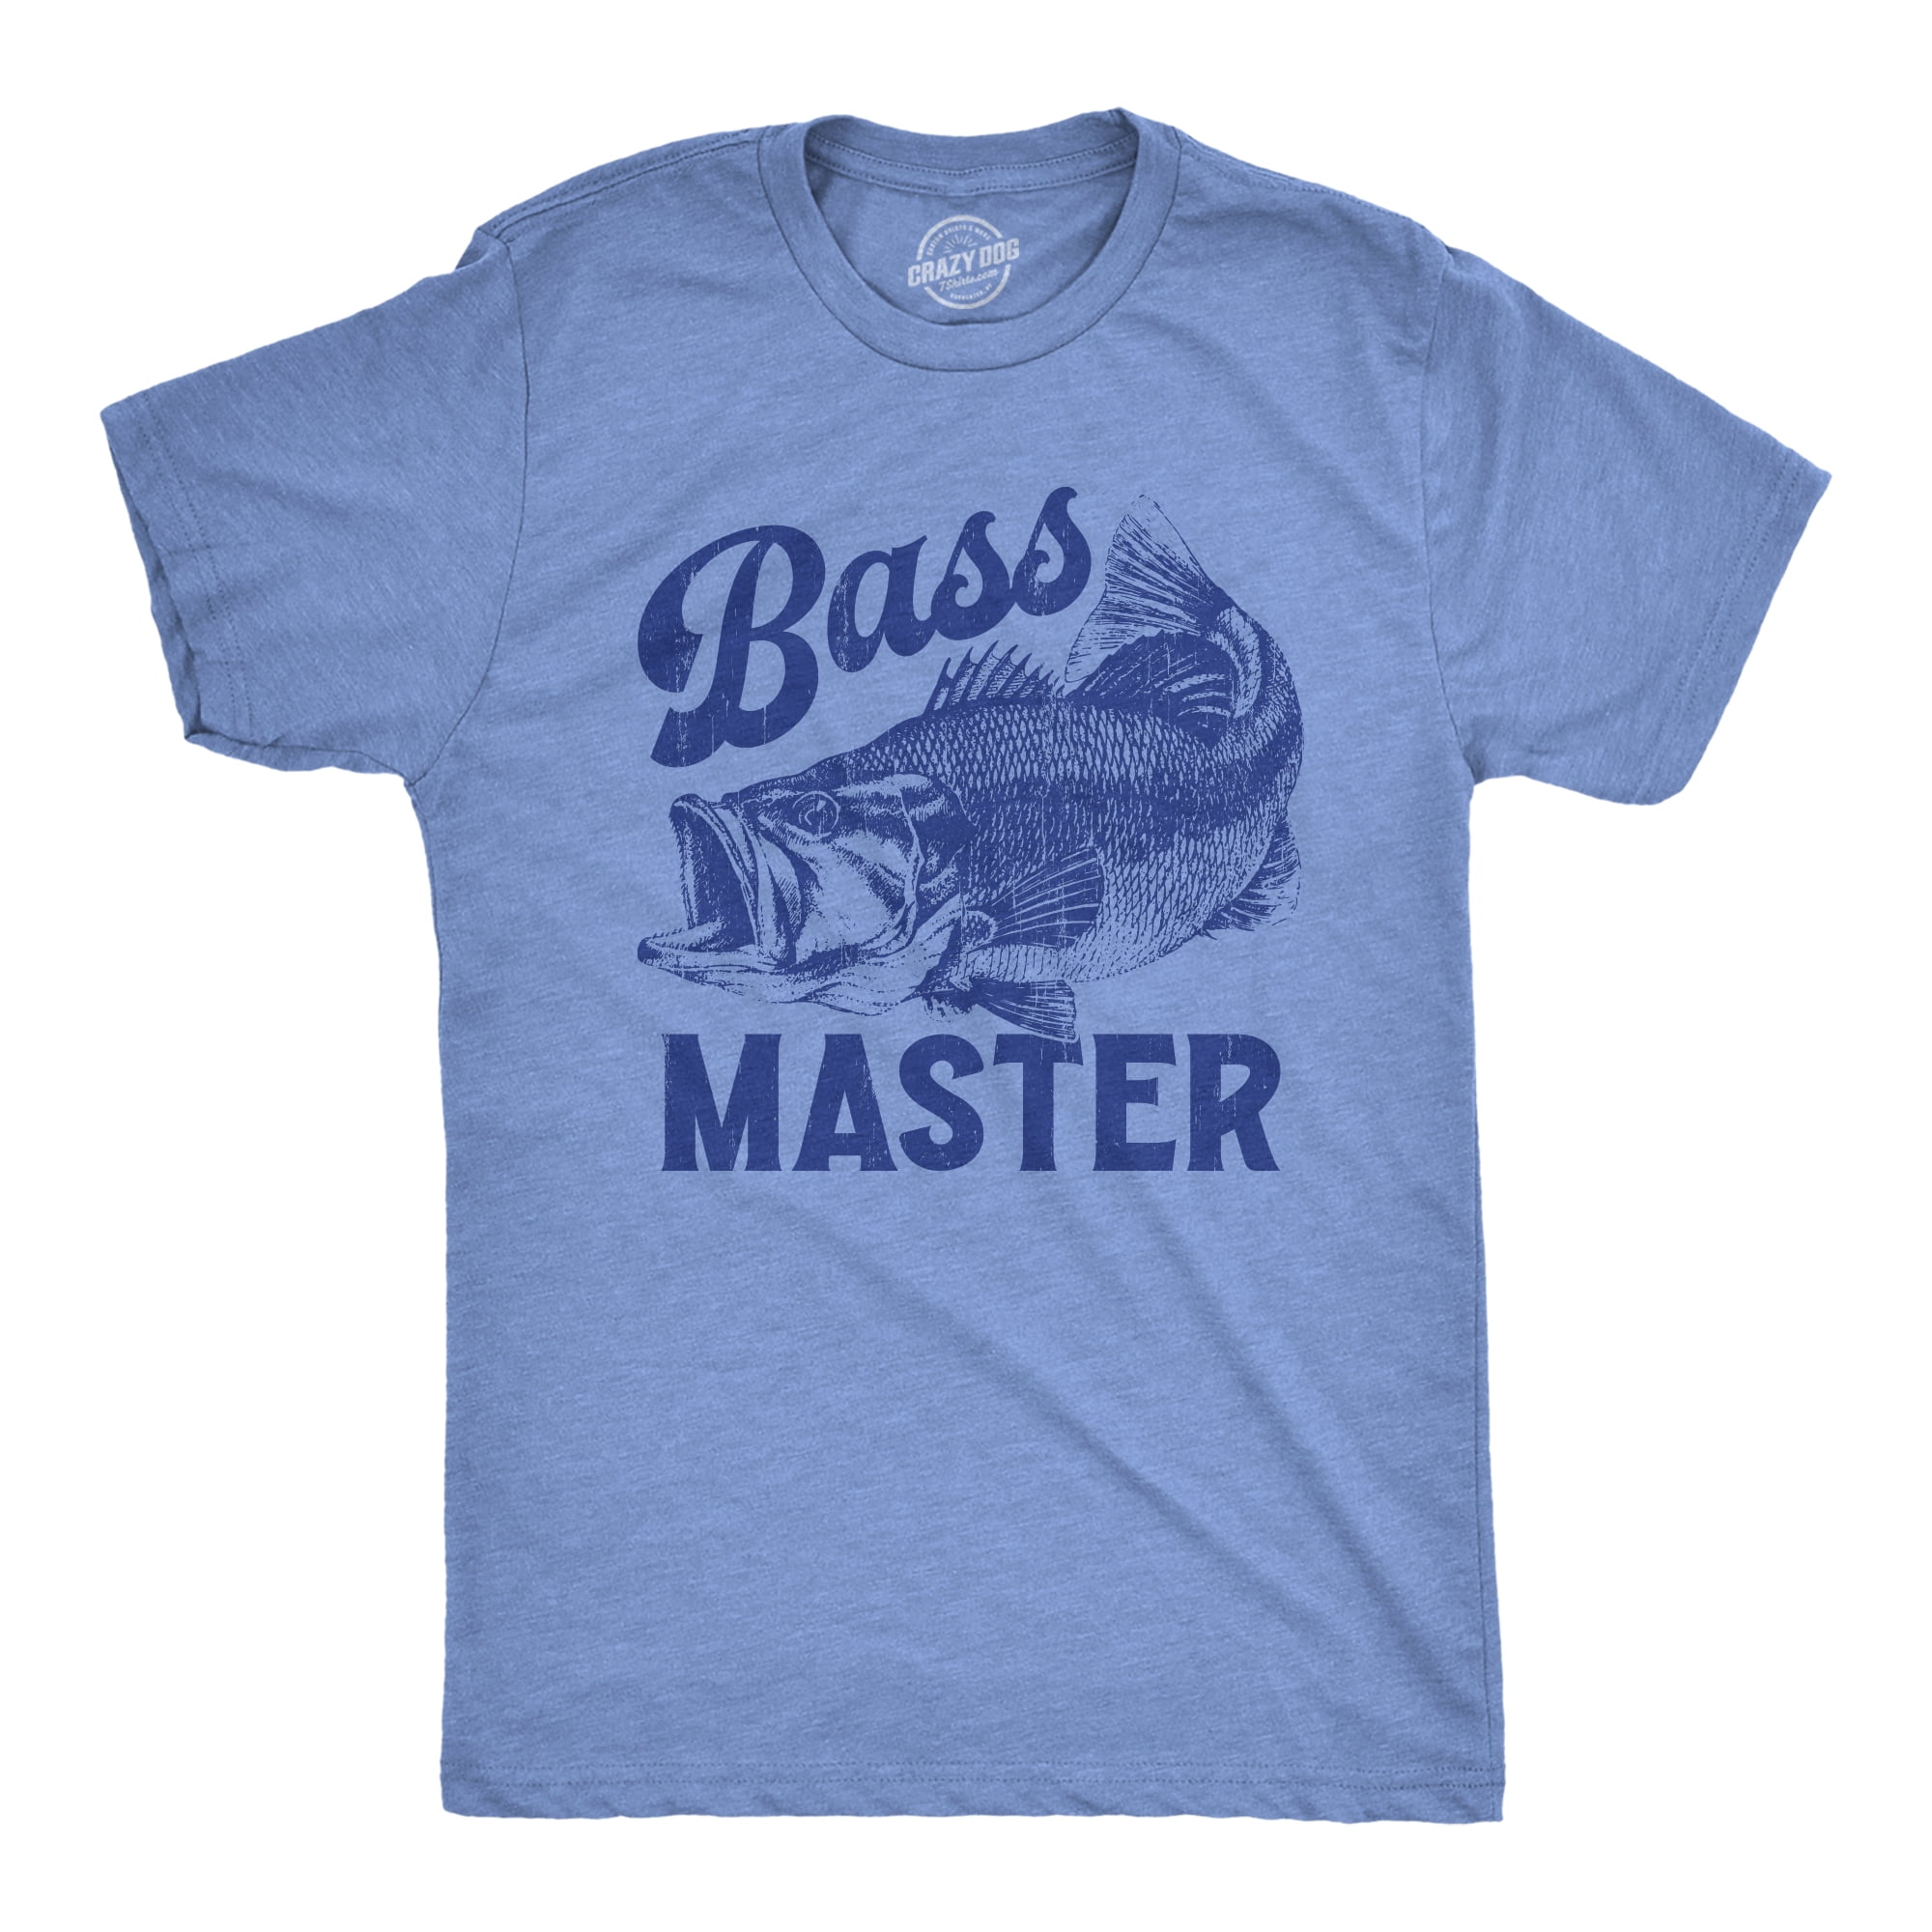 Mens Bass Master T Shirt Funny Sarcastic Fishing Professional Fish Graphic  Novelty Tee For Guys Graphic Tees